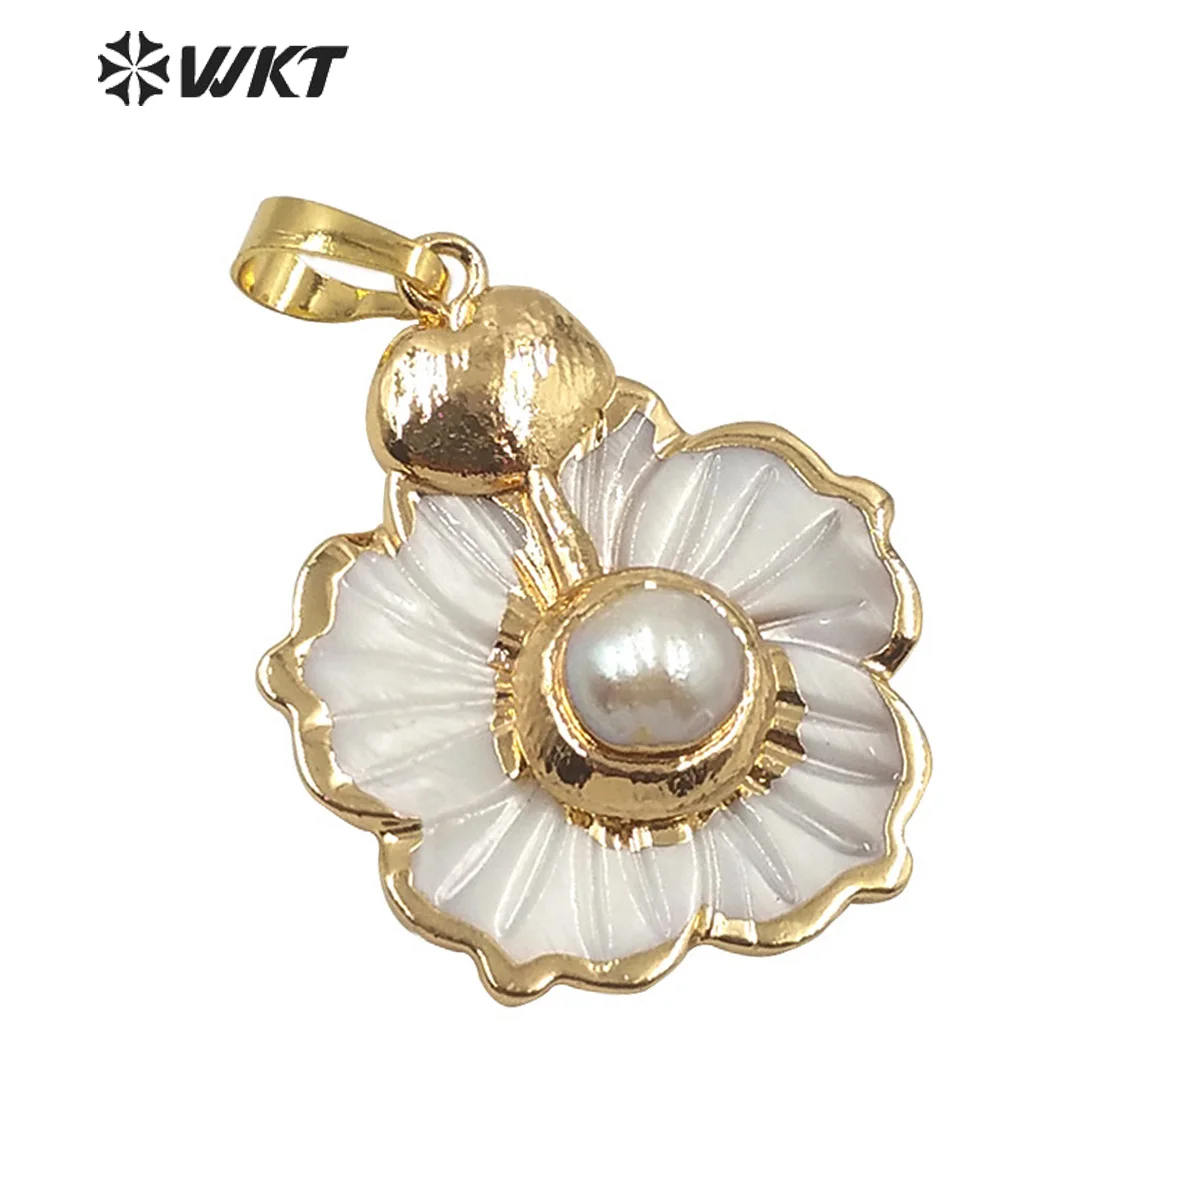 

WT-JP174 WKT Natural Shell Pendant Flower Shape Shell And Pearl Pendant Gold Electroplated Women Fashion Pendant Jewelry Finding